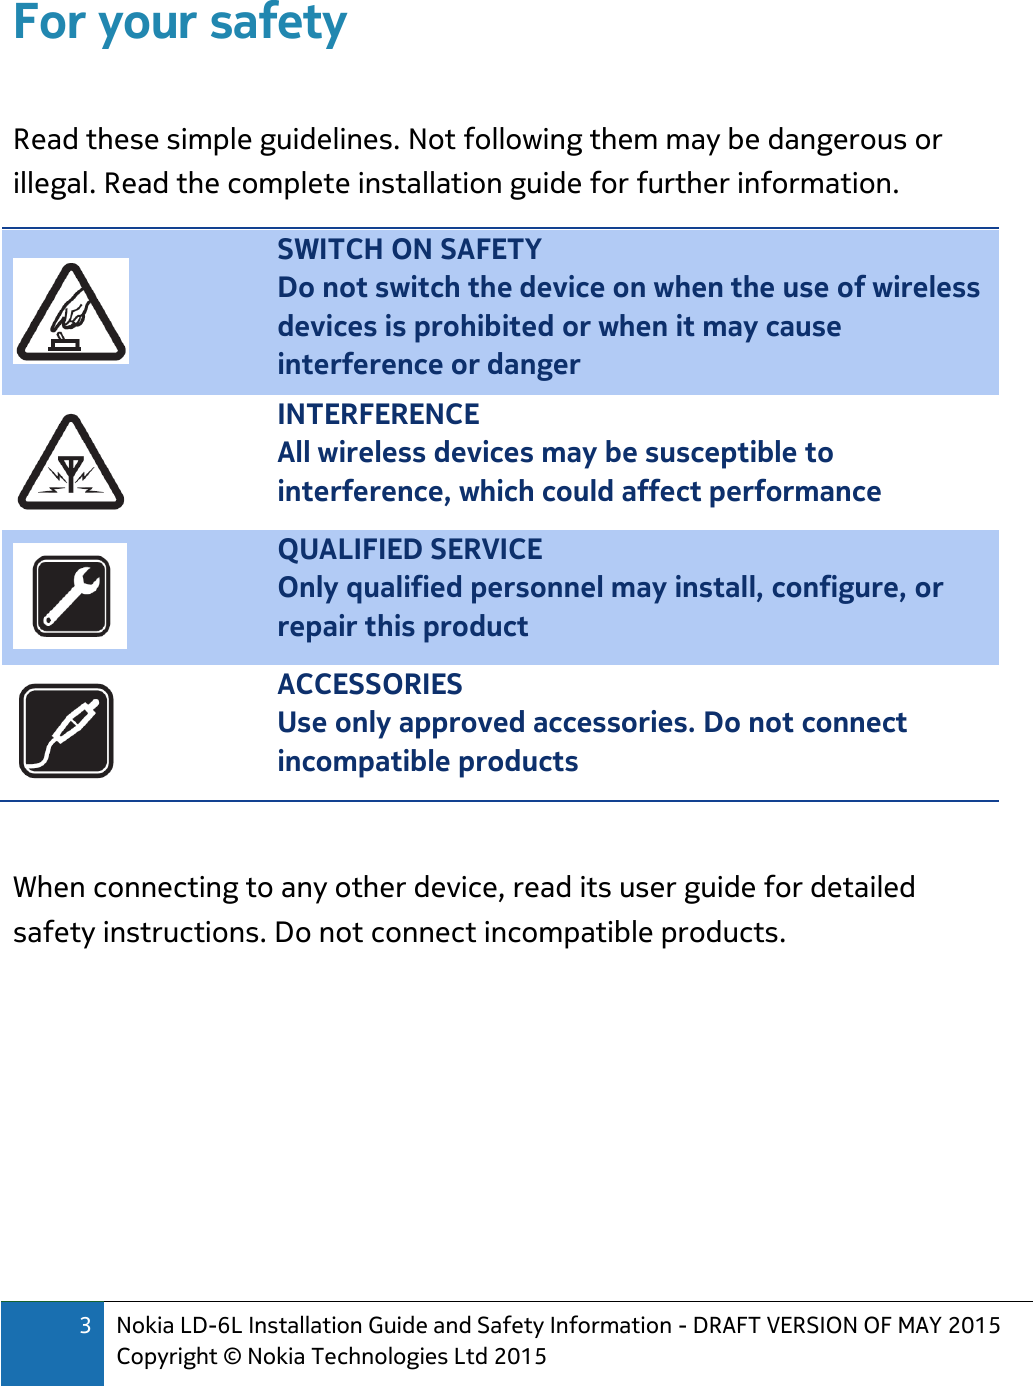 3 Nokia LD-6L Installation Guide and Safety Information - DRAFT VERSION OF MAY 2015 Copyright © Nokia Technologies Ltd 2015  For your safety  Read these simple guidelines. Not following them may be dangerous or illegal. Read the complete installation guide for further information.  SWITCH ON SAFETY Do not switch the device on when the use of wireless devices is prohibited or when it may cause interference or danger  INTERFERENCE All wireless devices may be susceptible to interference, which could affect performance  QUALIFIED SERVICE Only qualified personnel may install, configure, or repair this product  ACCESSORIES Use only approved accessories. Do not connect incompatible products  When connecting to any other device, read its user guide for detailed safety instructions. Do not connect incompatible products.      